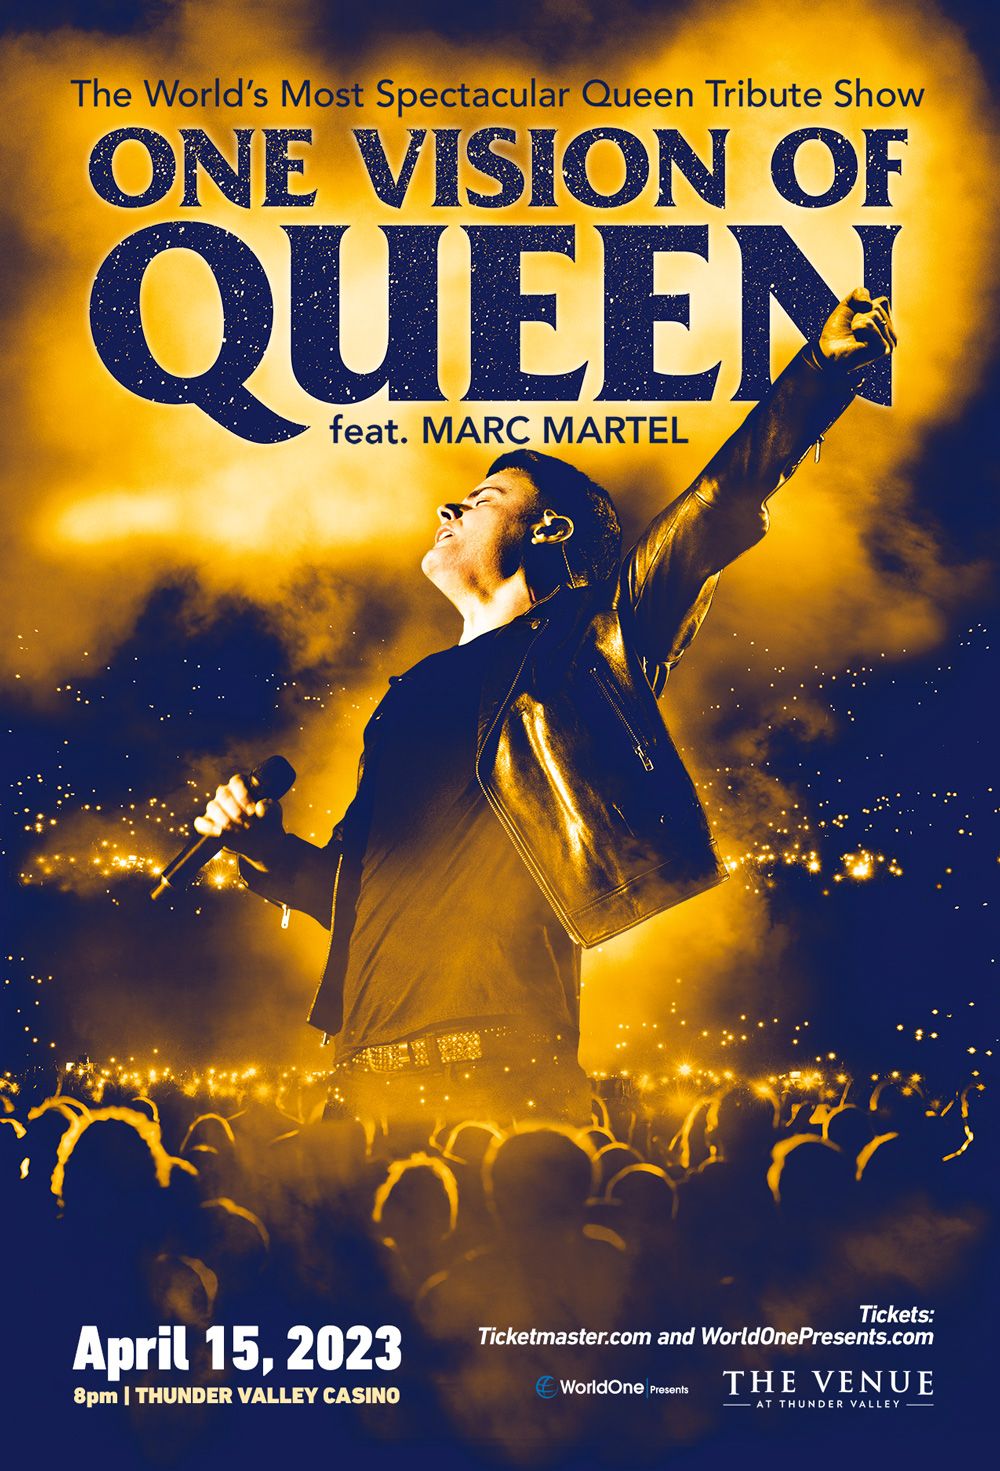 One Vision of QUEEN featuring Marc Martel